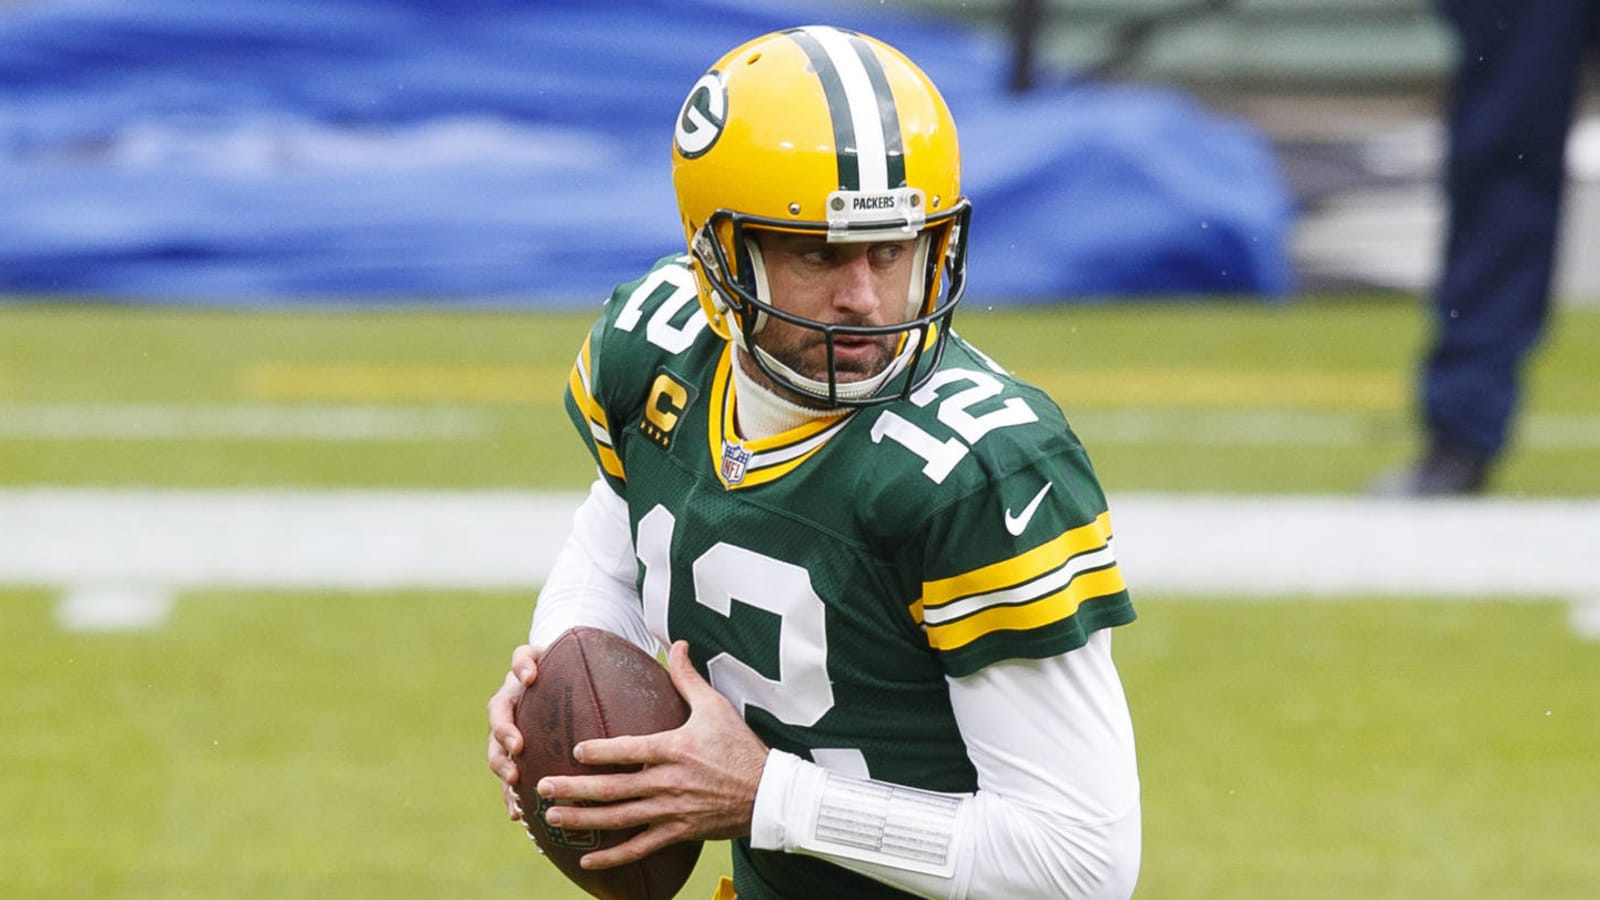 Report: Packers exploring QB options amid Rodgers drama